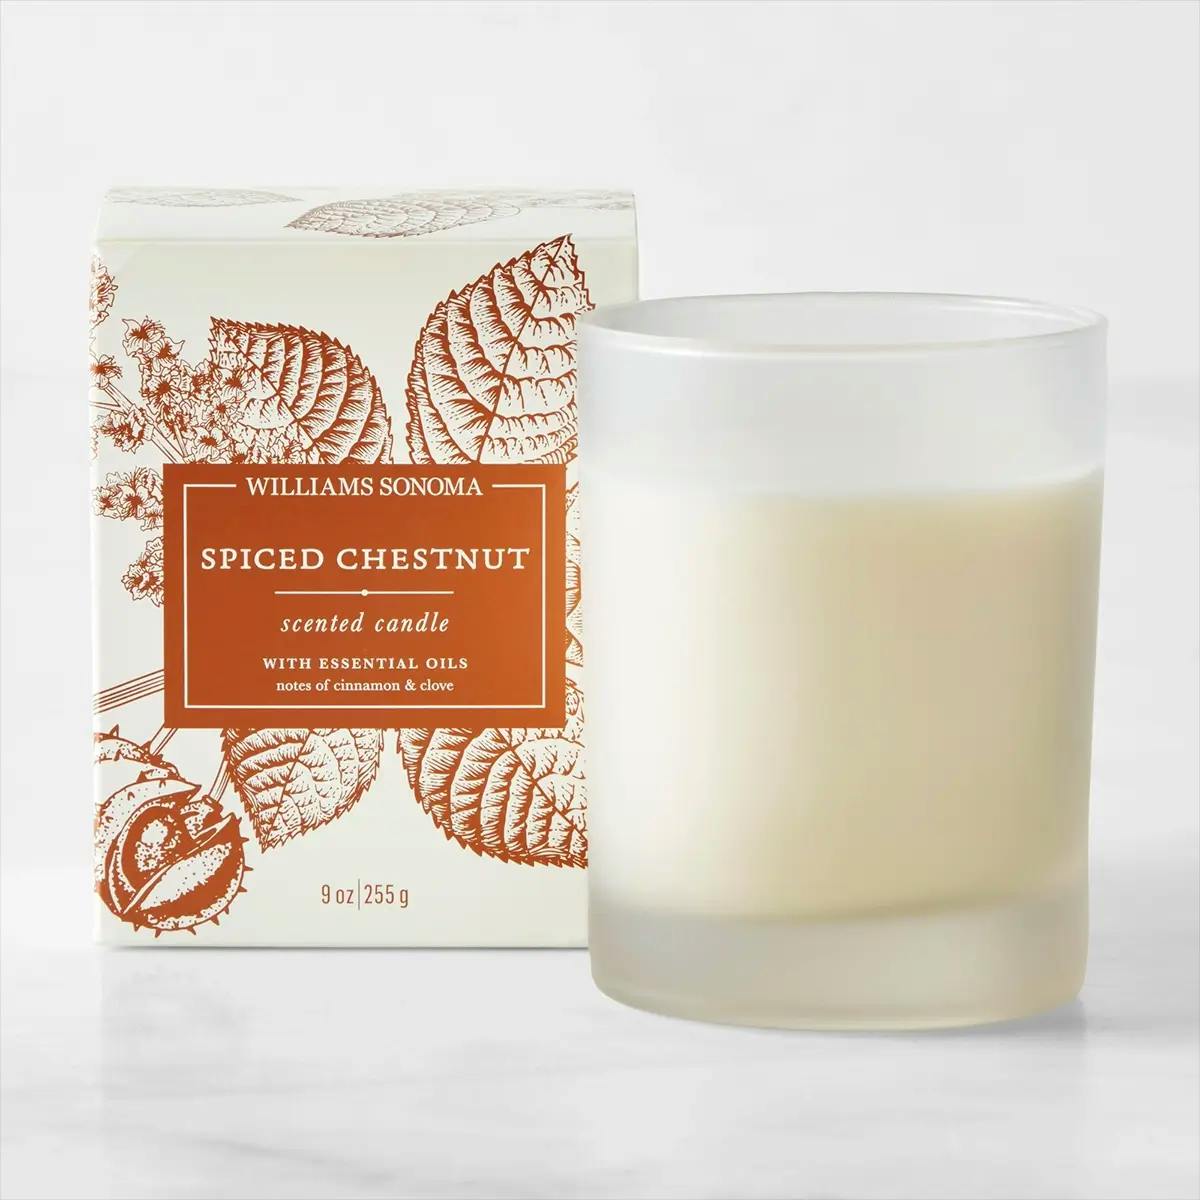 Spiced Chestnut Christmas candle in frosted glass jar by Williams Sonoma, with box in background.